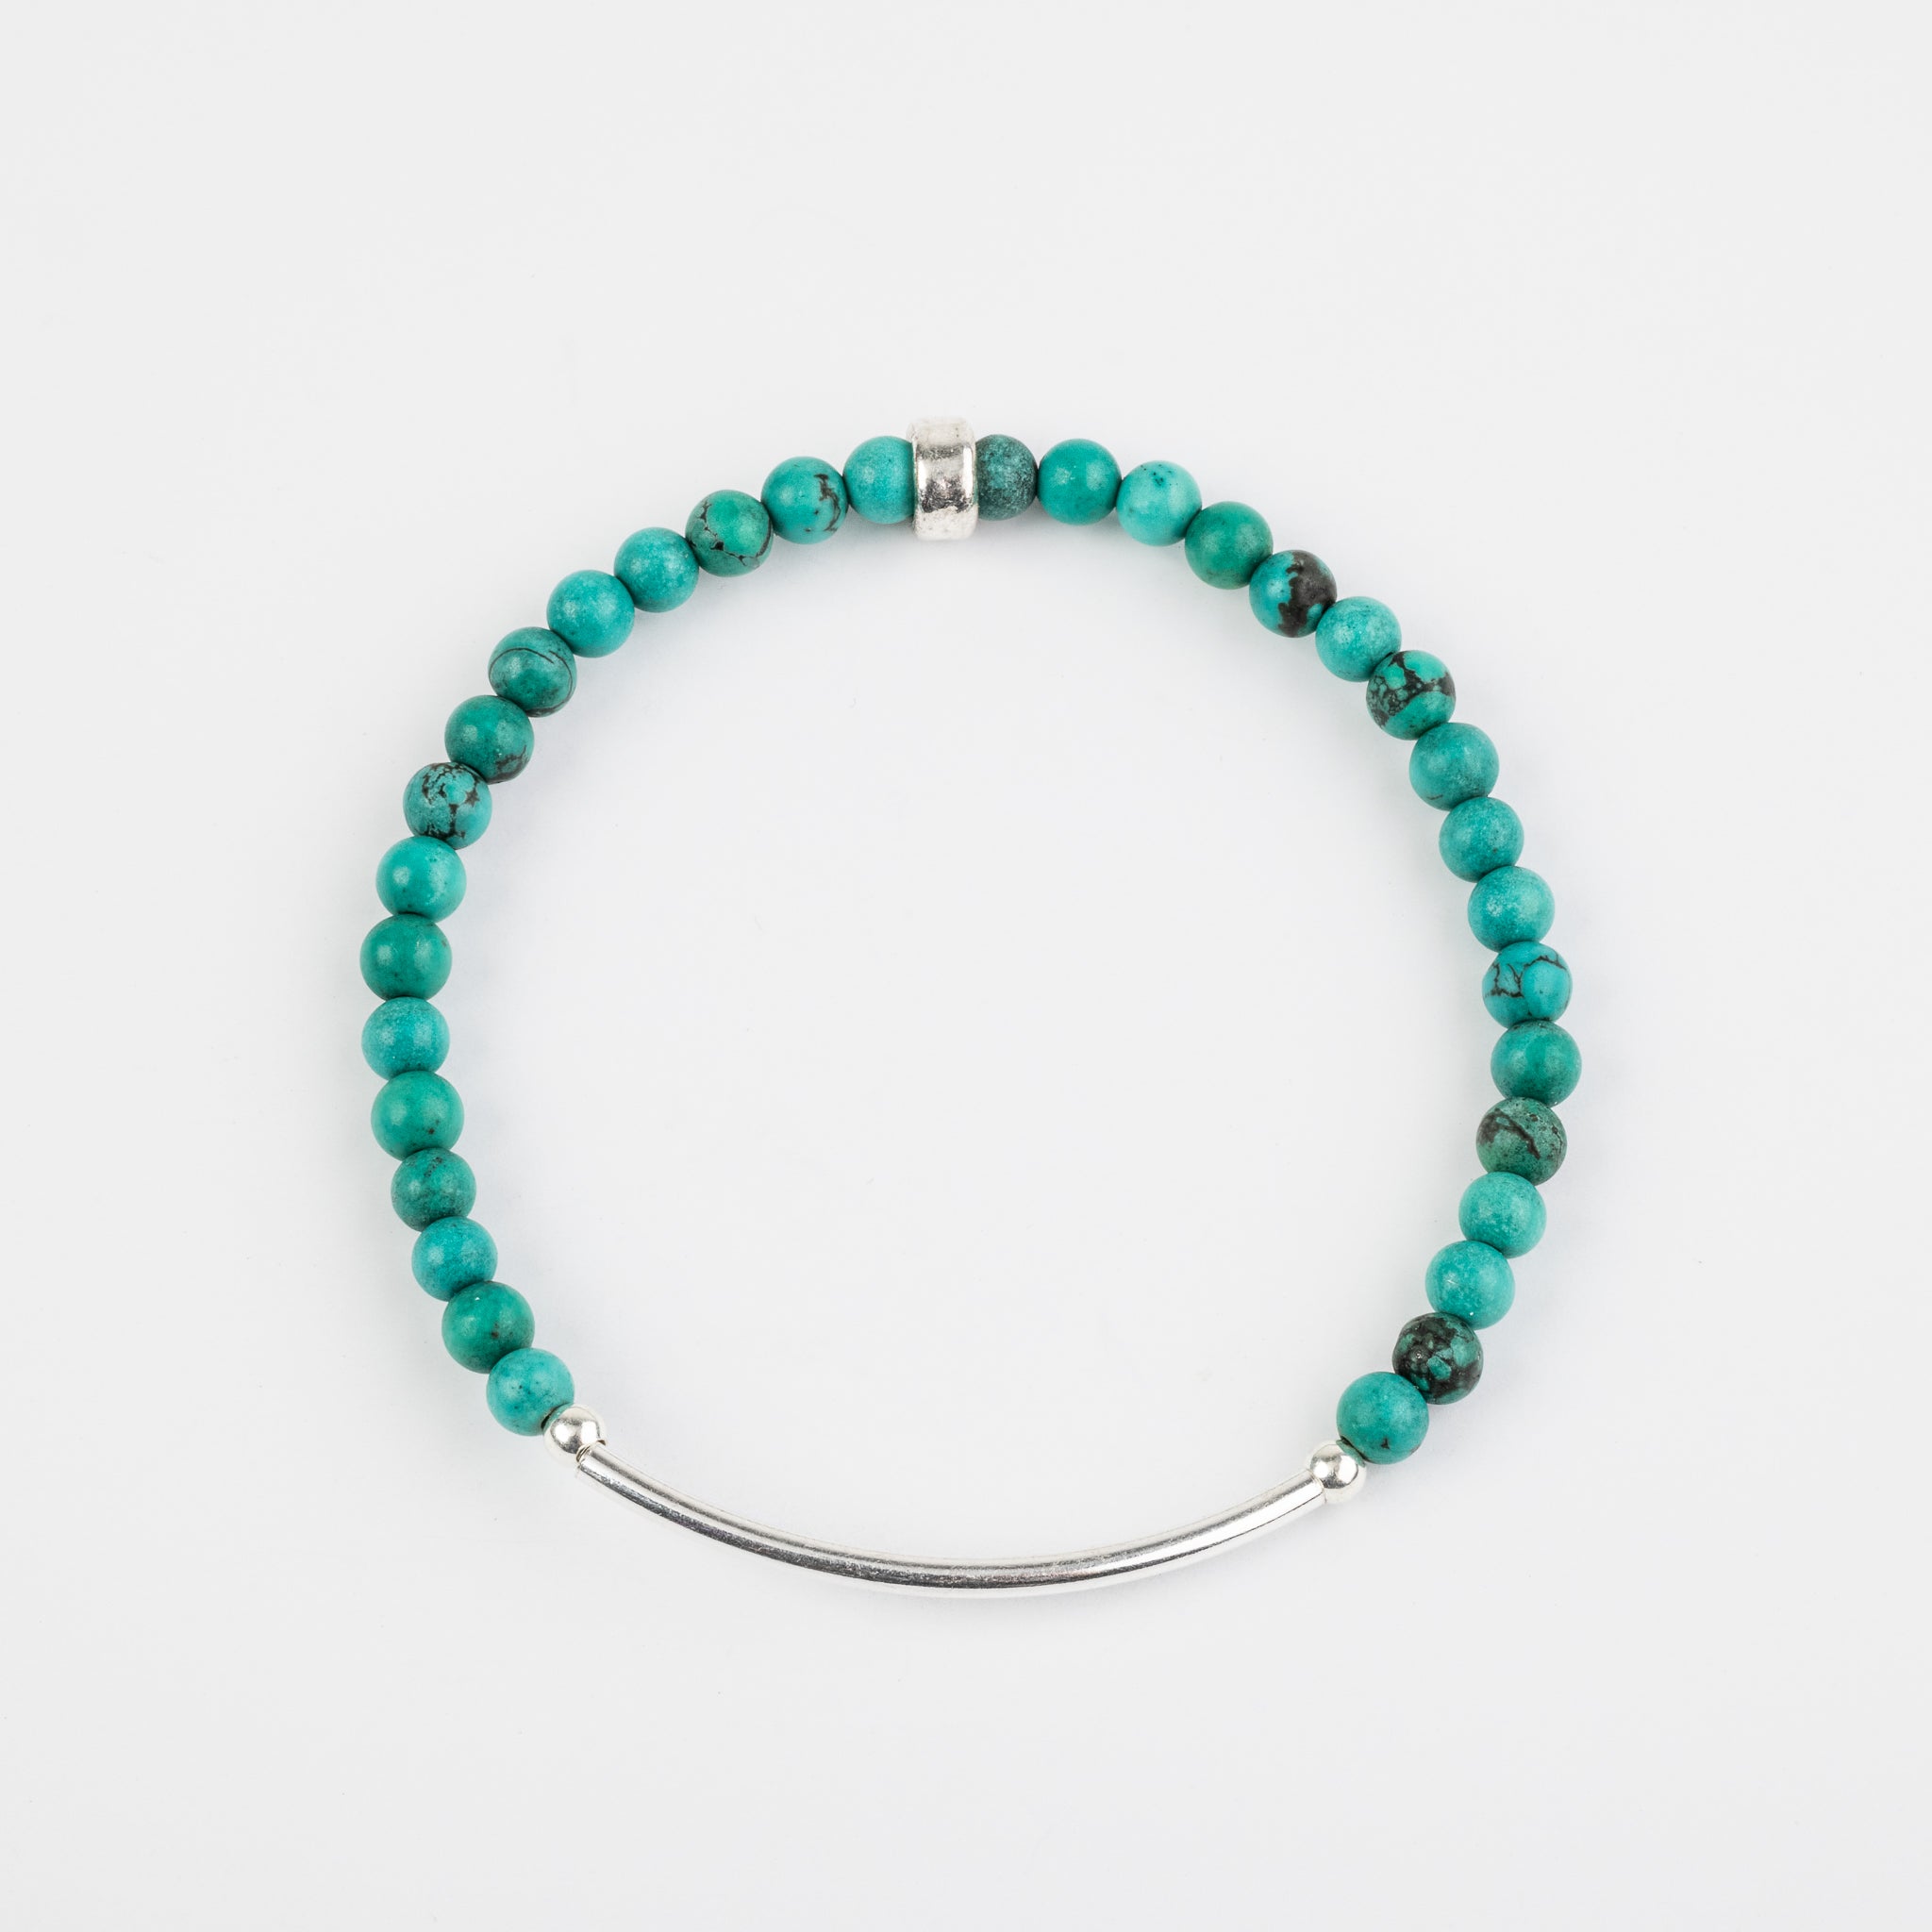 Tibetan Turquoise Silver Bar Bracelet- Sold Out